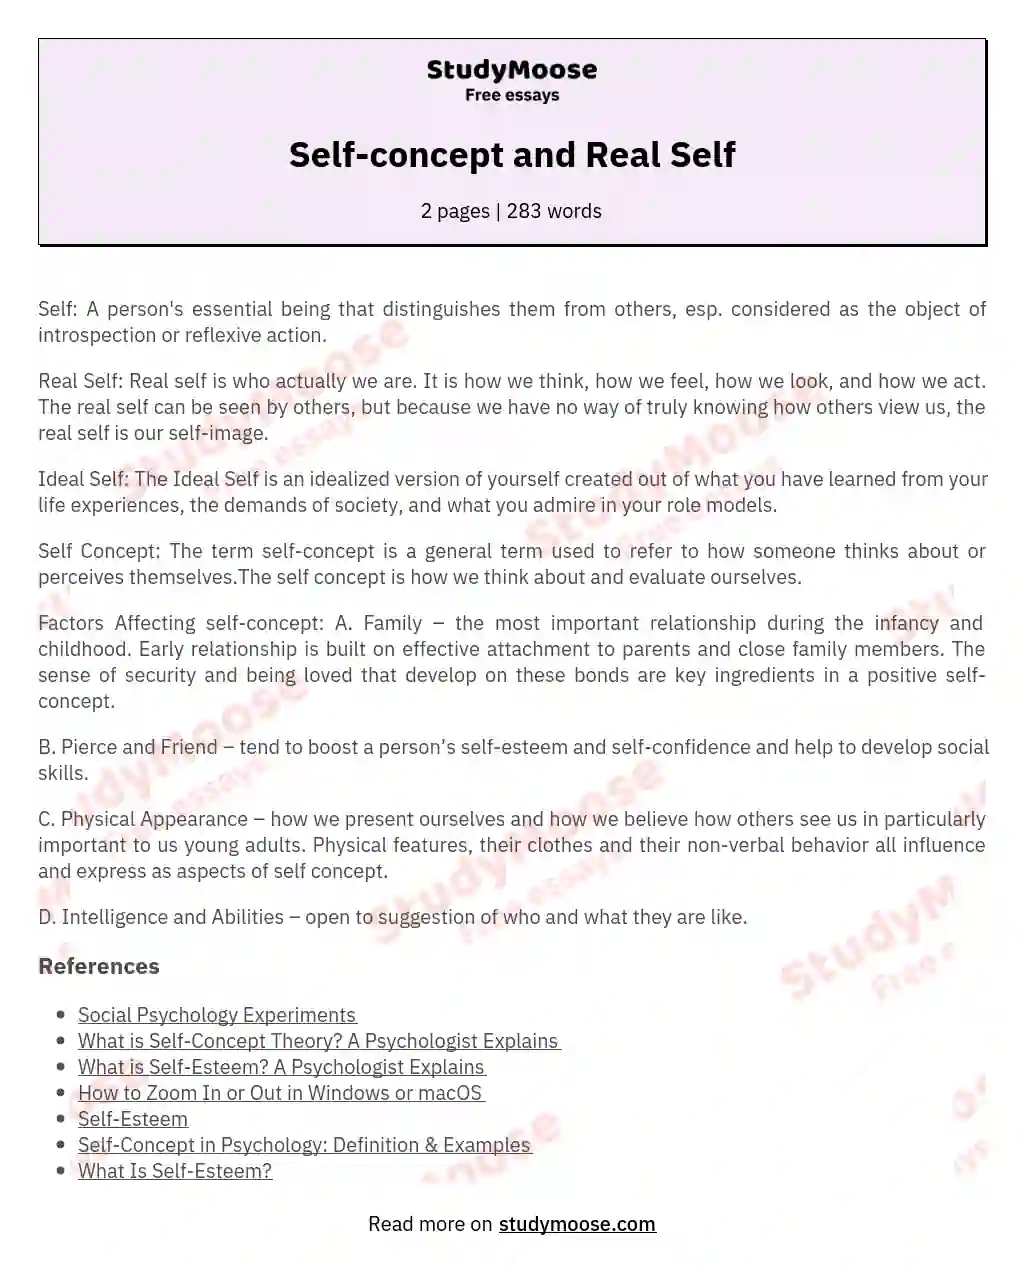 Self-concept and Real Self essay